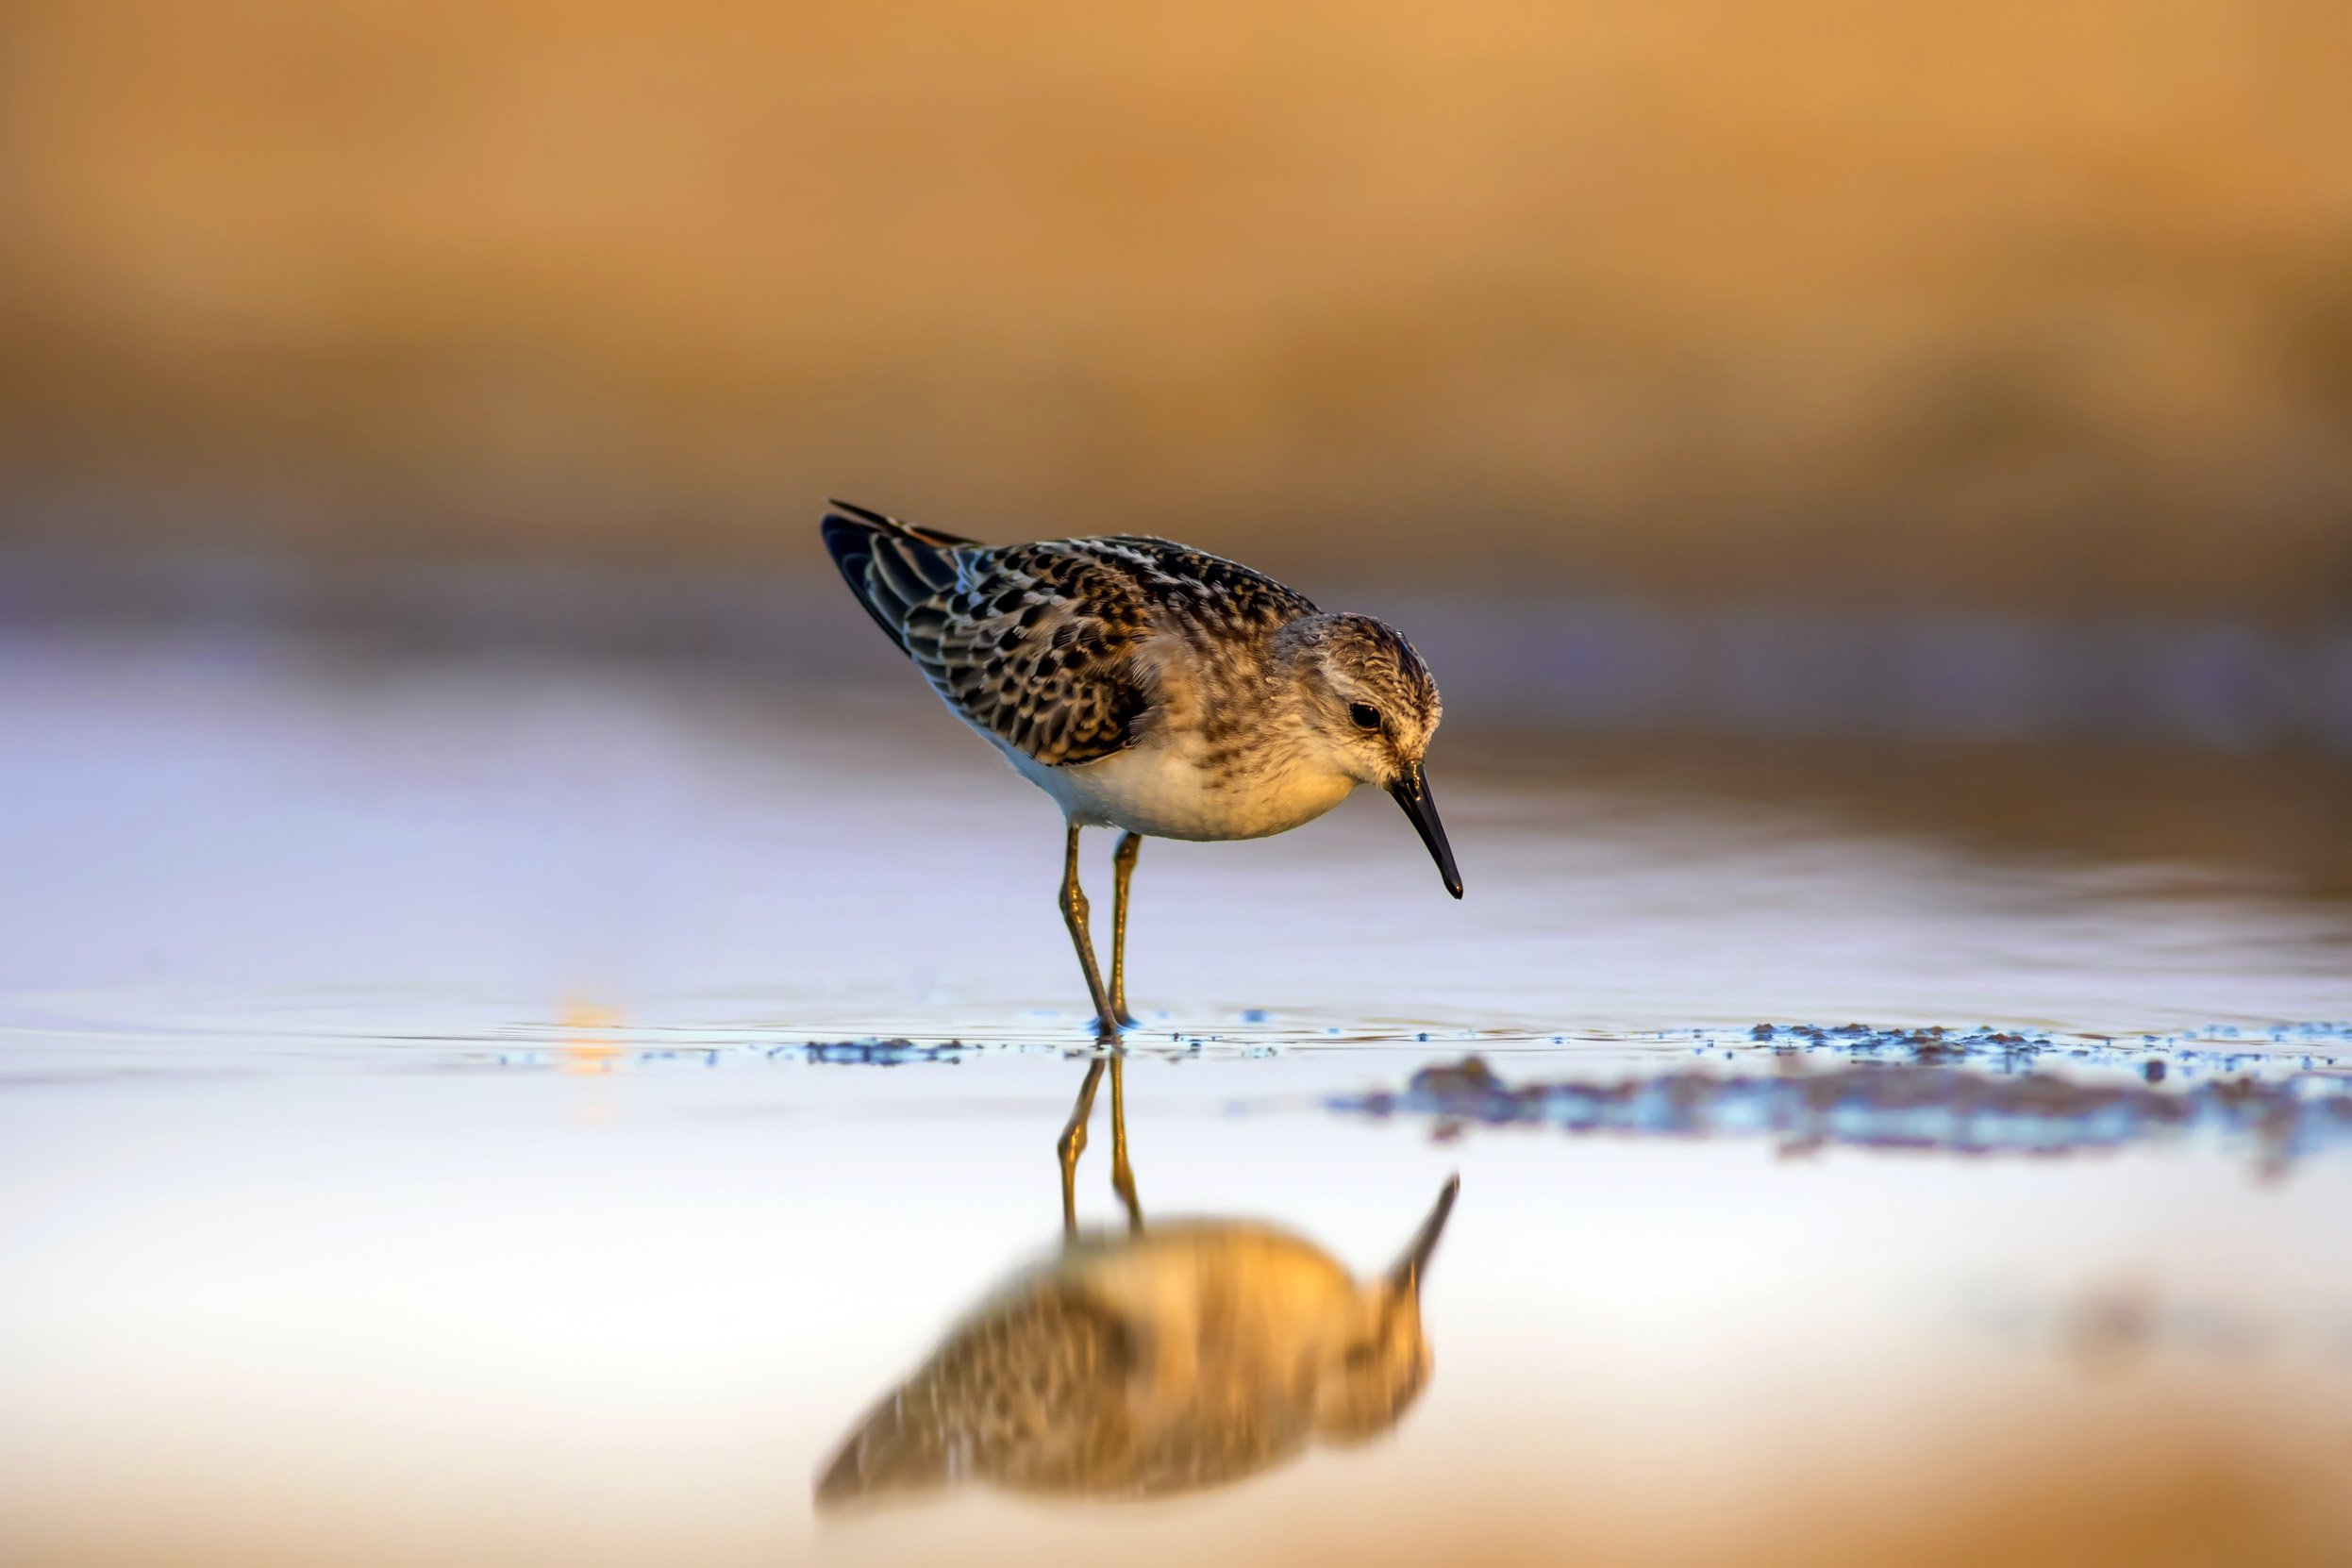 A Little Stint foraging in shallow pools of water.